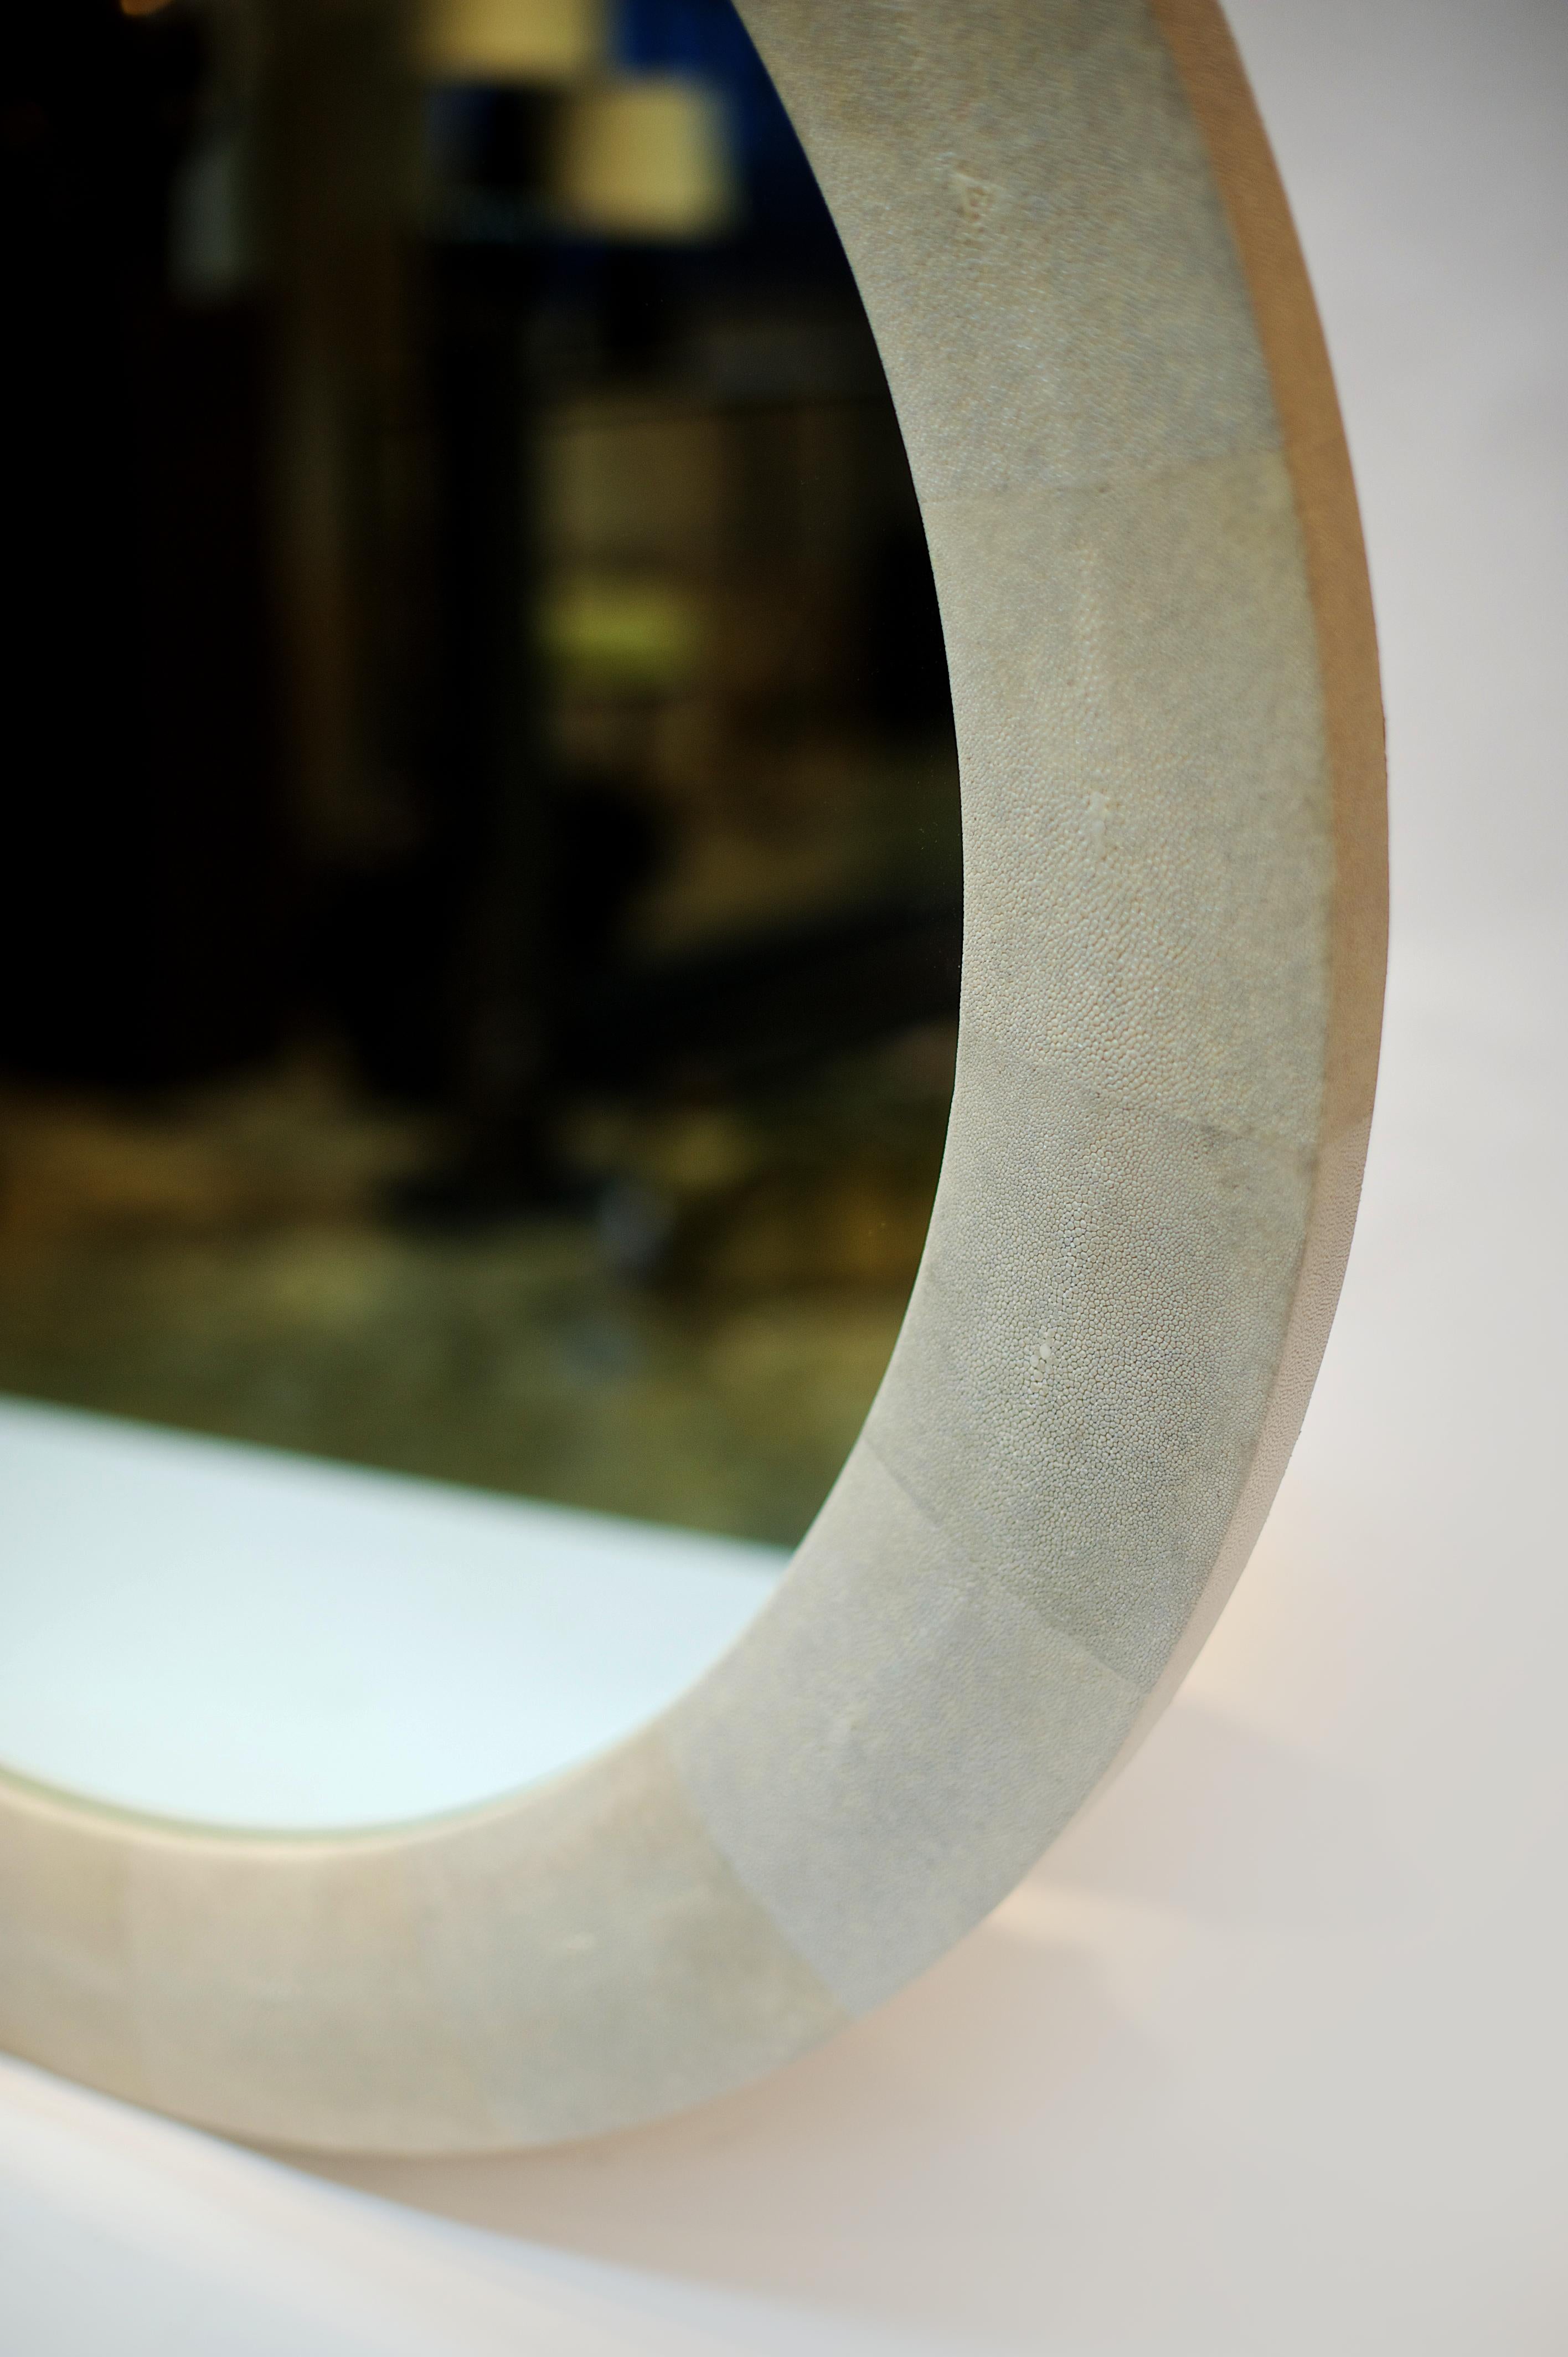 Ivory Shagreen Round Galucha Mirror by Elan Atelier

Round mirror in shagreen (stingray skin). Additional shagreen colors available.

Dimensions/
dia 41.3 x h 1.4 in
dia 105 x h 3.5 cm

112 weeks production time, plus international shipping.